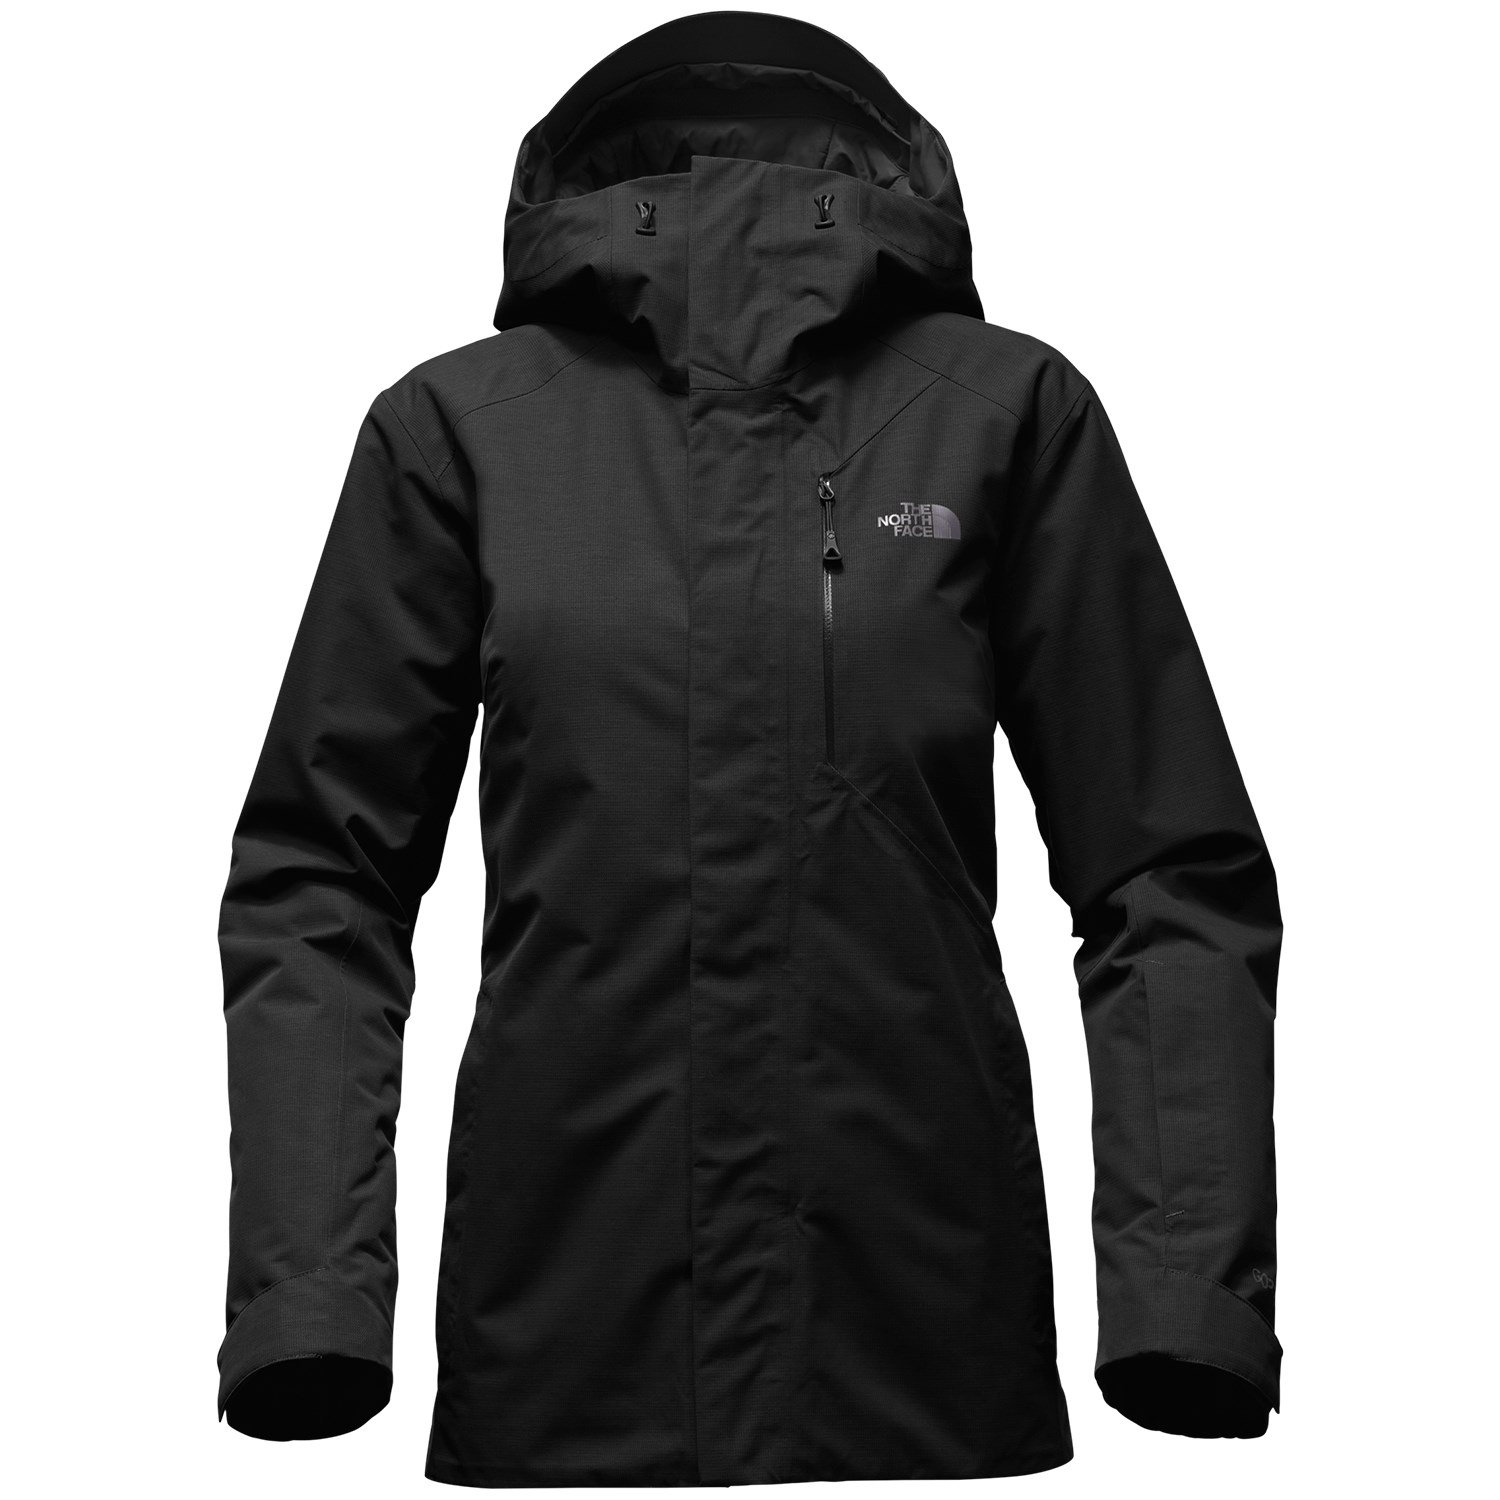 【THE NORTH FACE】NFZ INSULATED JACKET